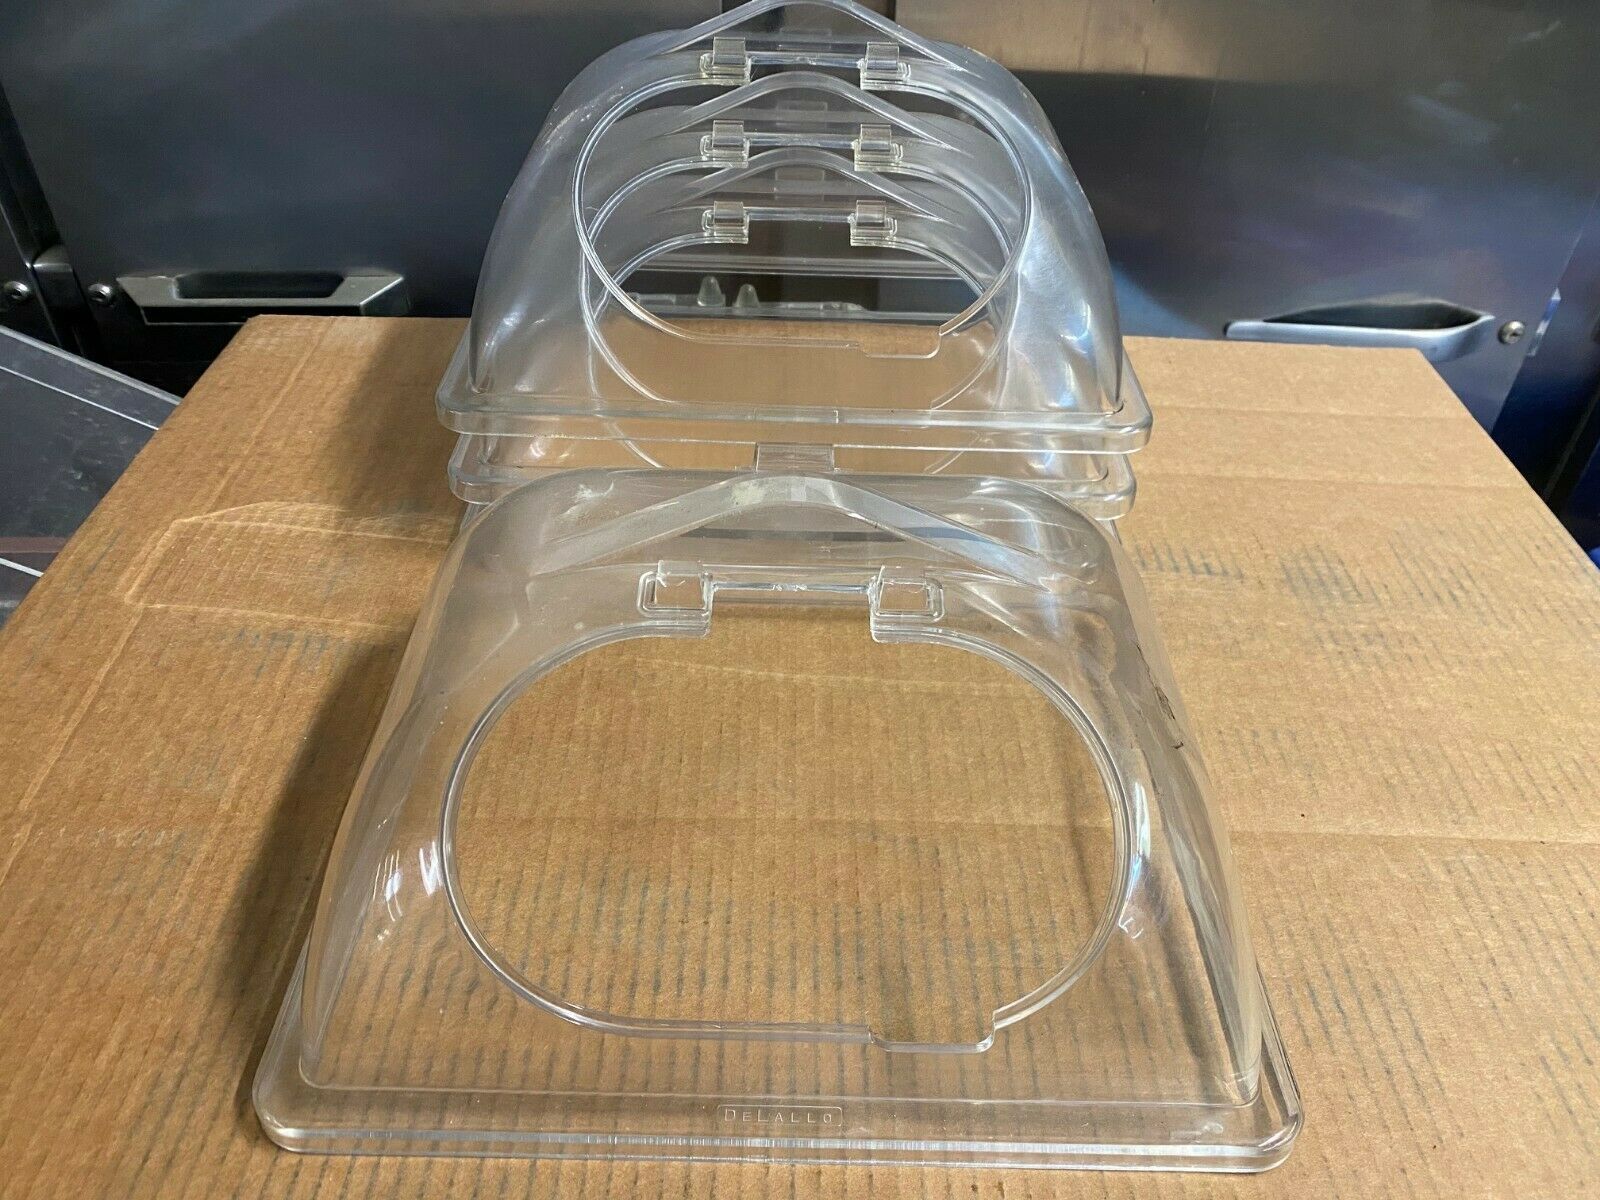 Primary image for Set of 4 DeLallo Clear Plastic Lids Food Serving Insert Pan Covers without Doors